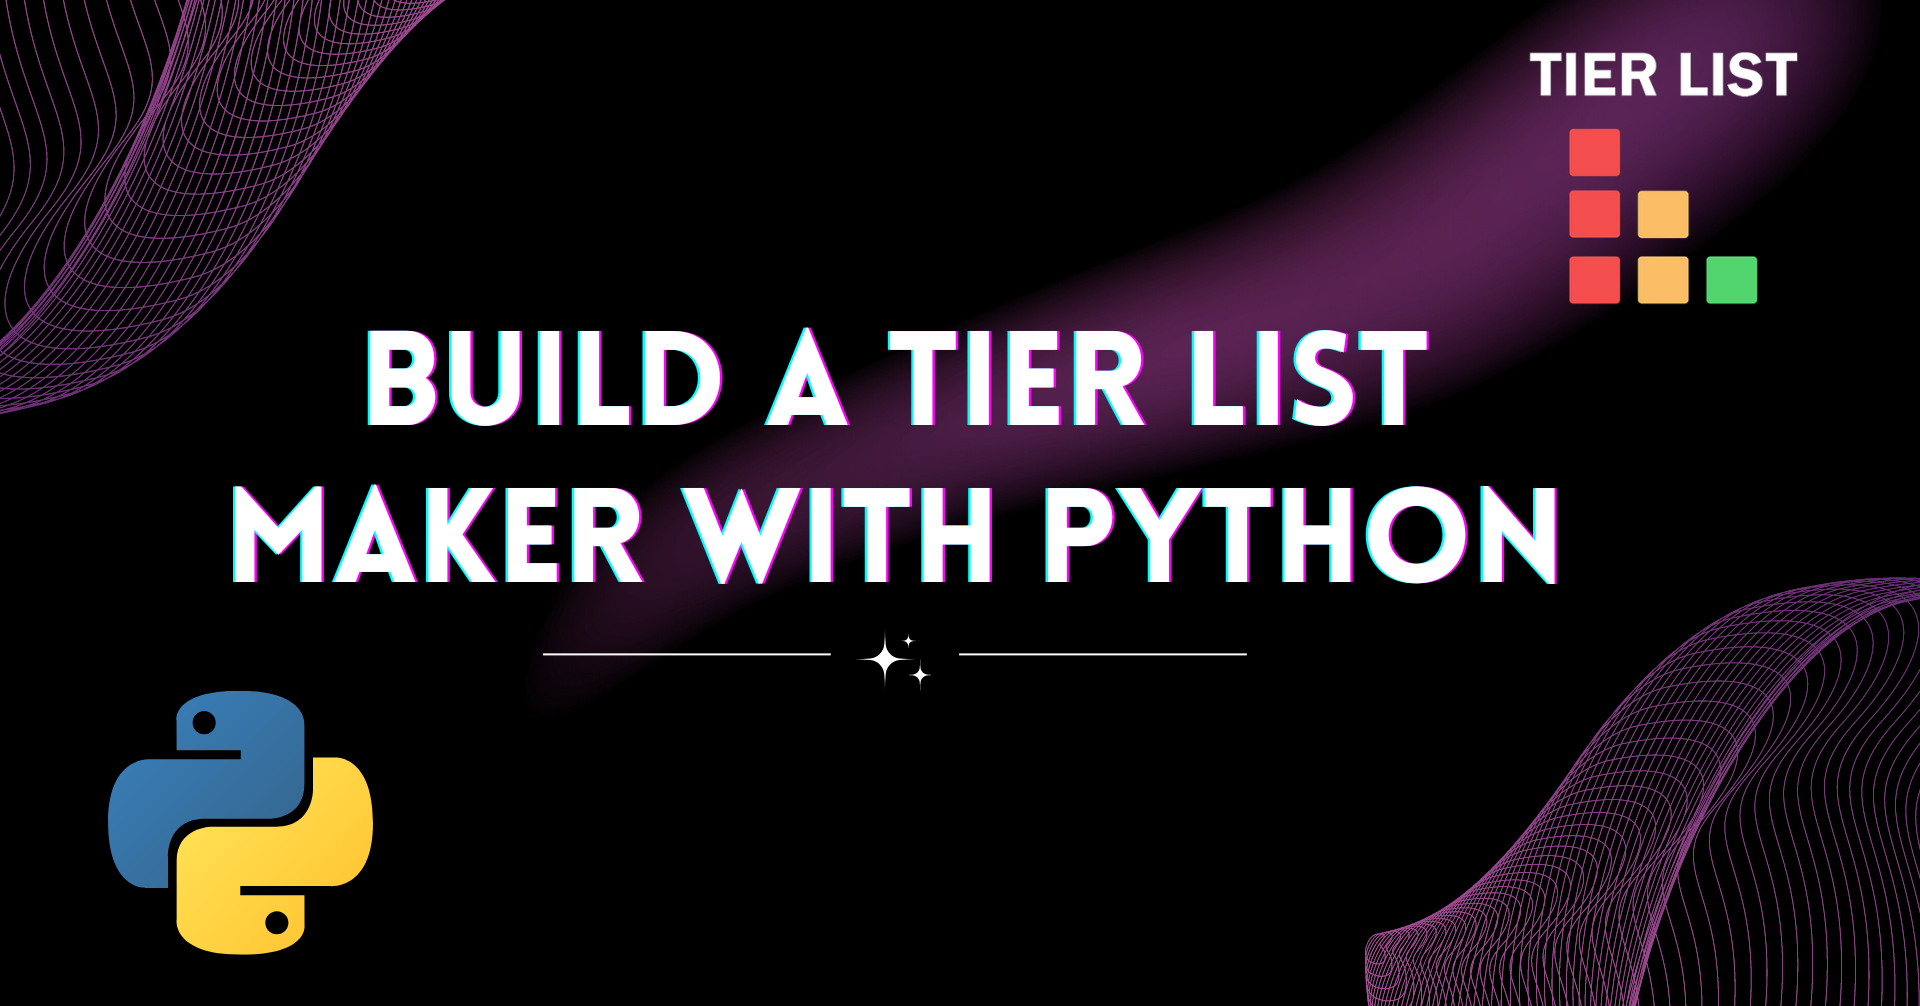 How to Build a Tiered List Maker with Python